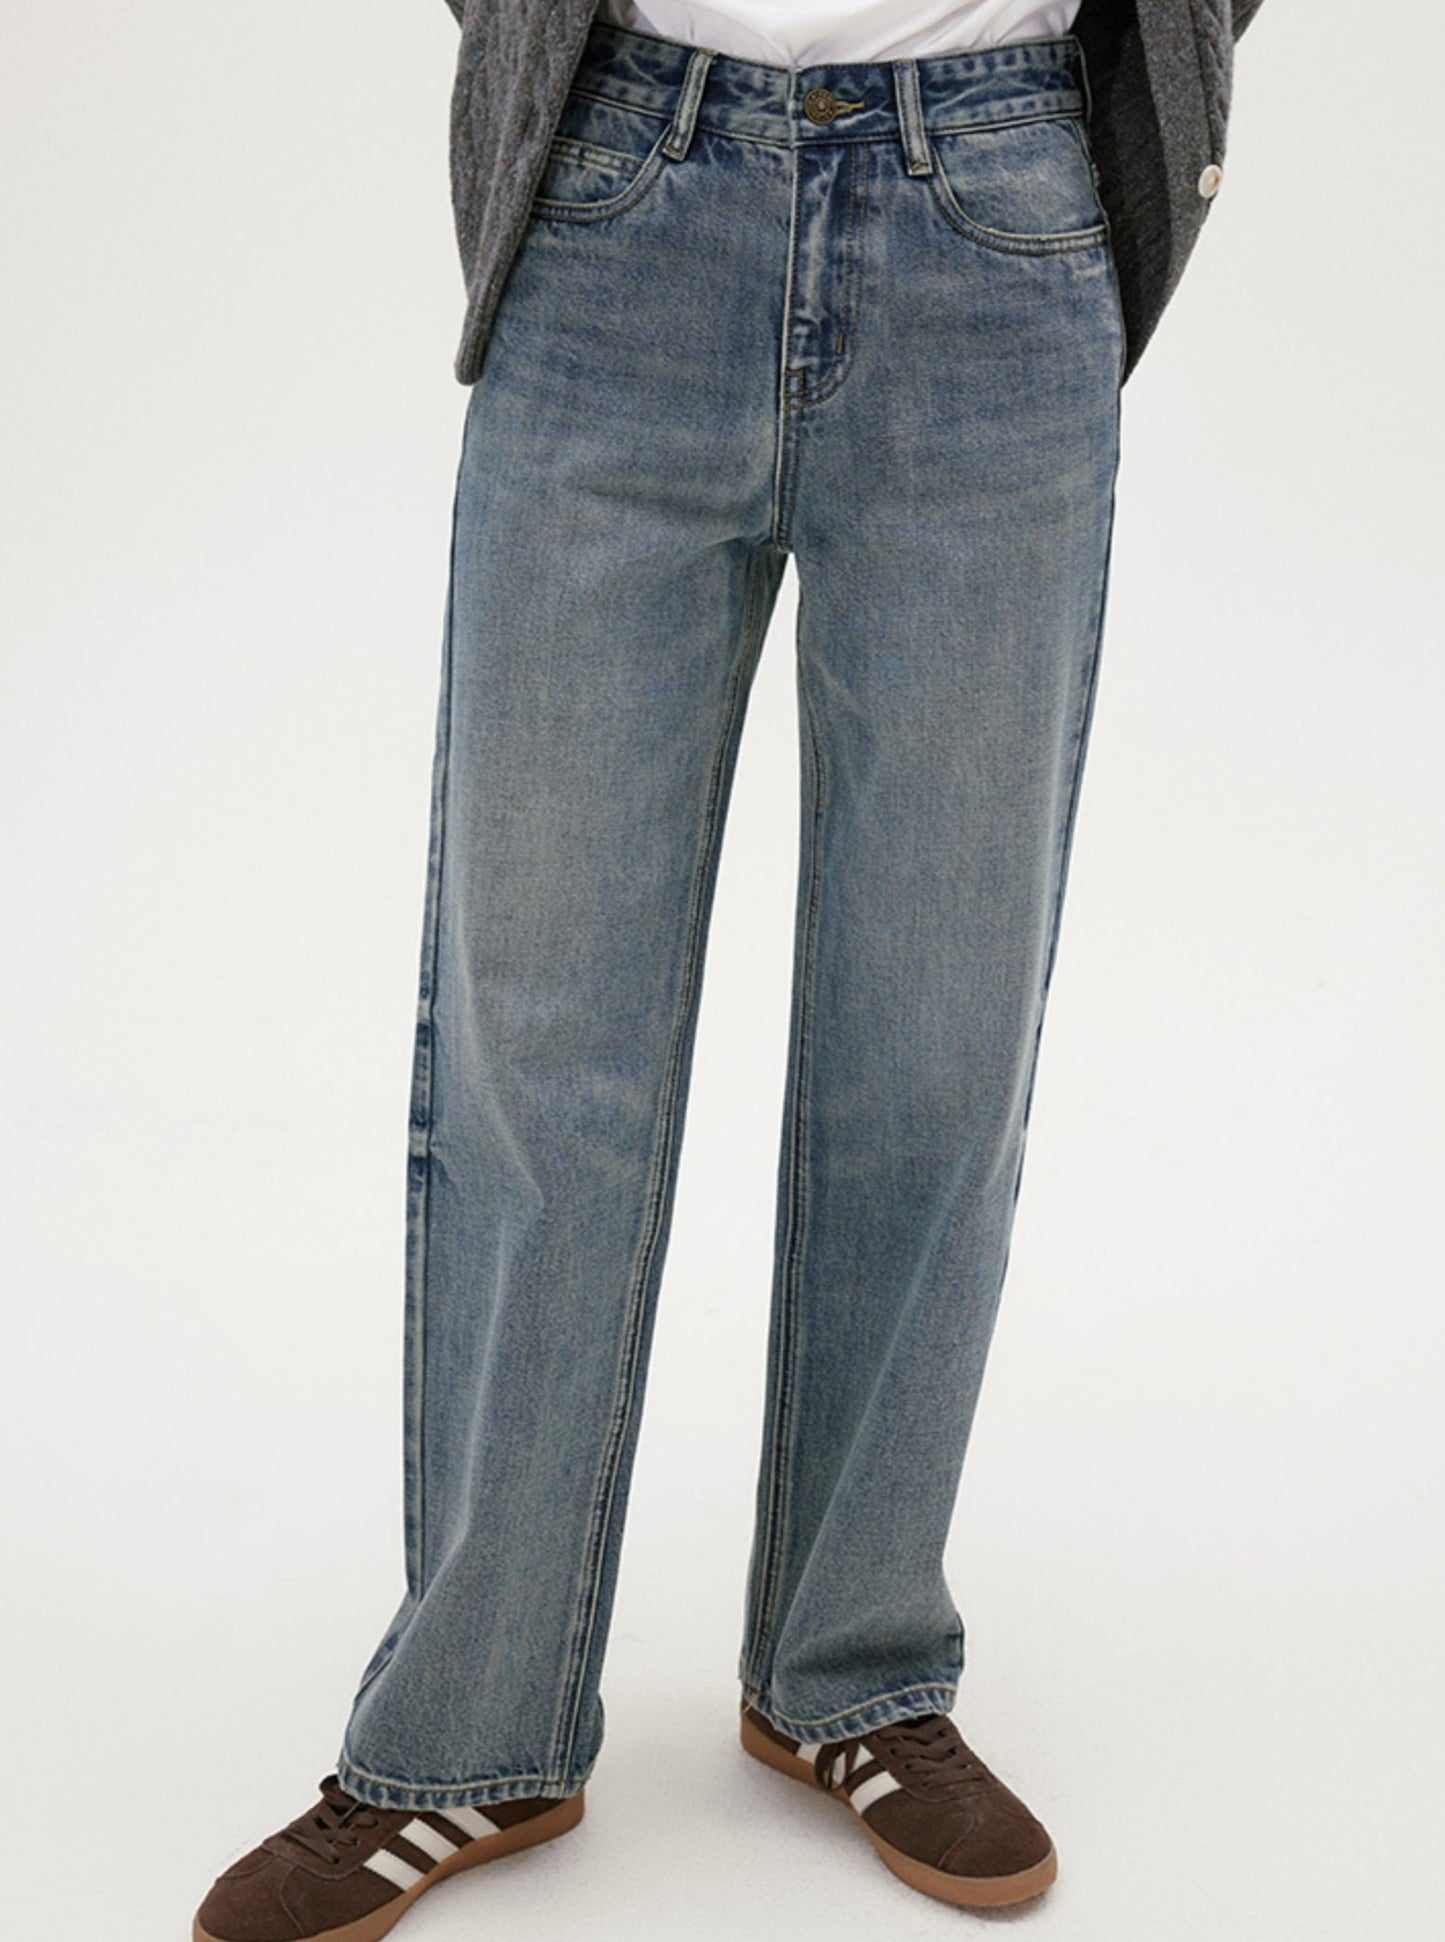 Fashionable Casual Distressed Washed Pants